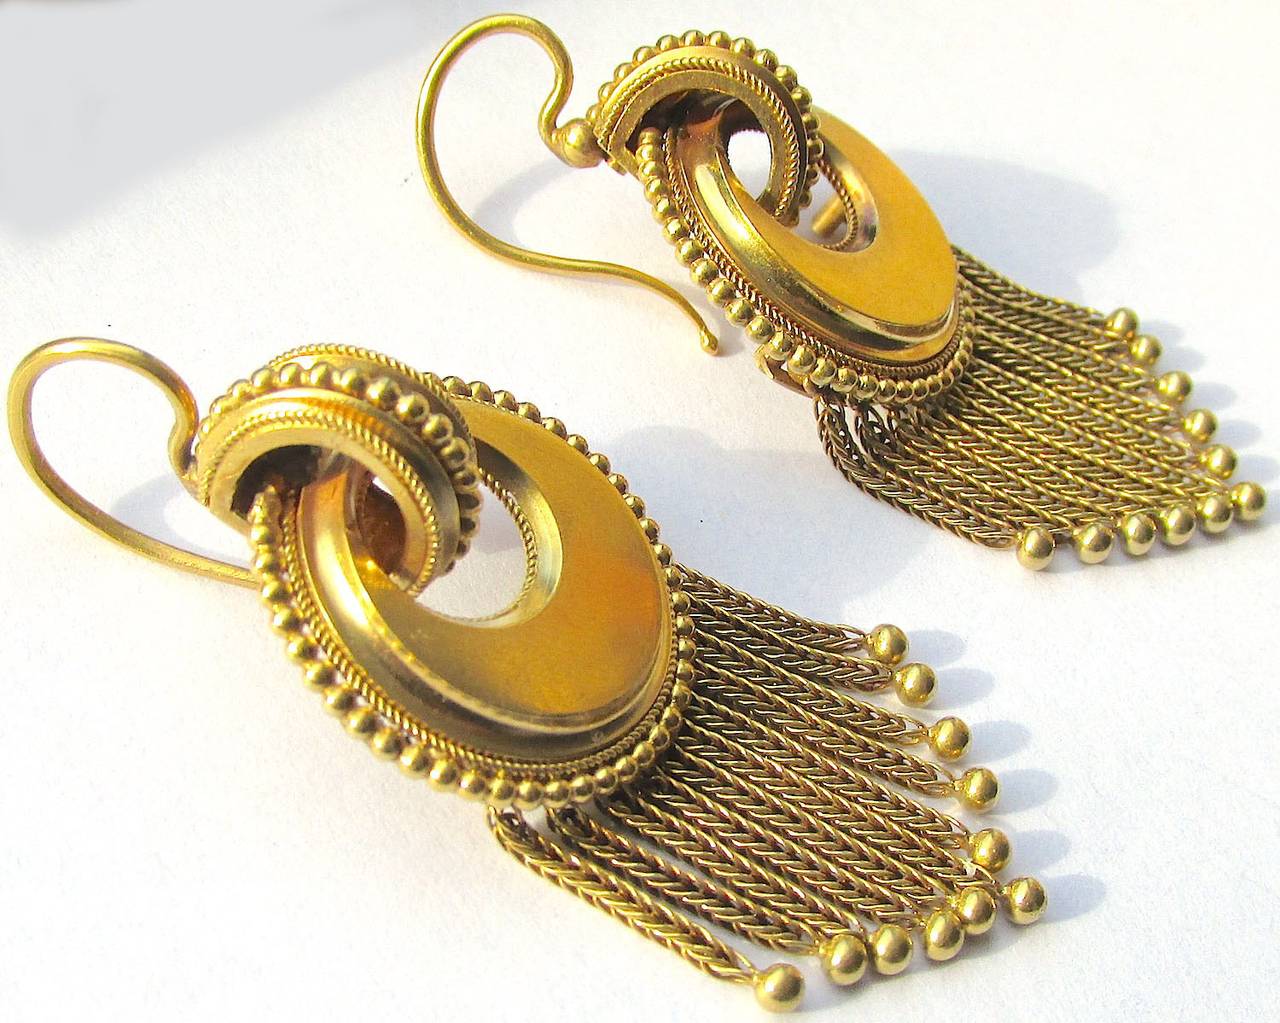 Wonderful Victorian 18K gold fringe earrings that will swing and sway as you walk down the street or dance the night away. Beautifully decorated with cannetille bead work, the earrings measure 2